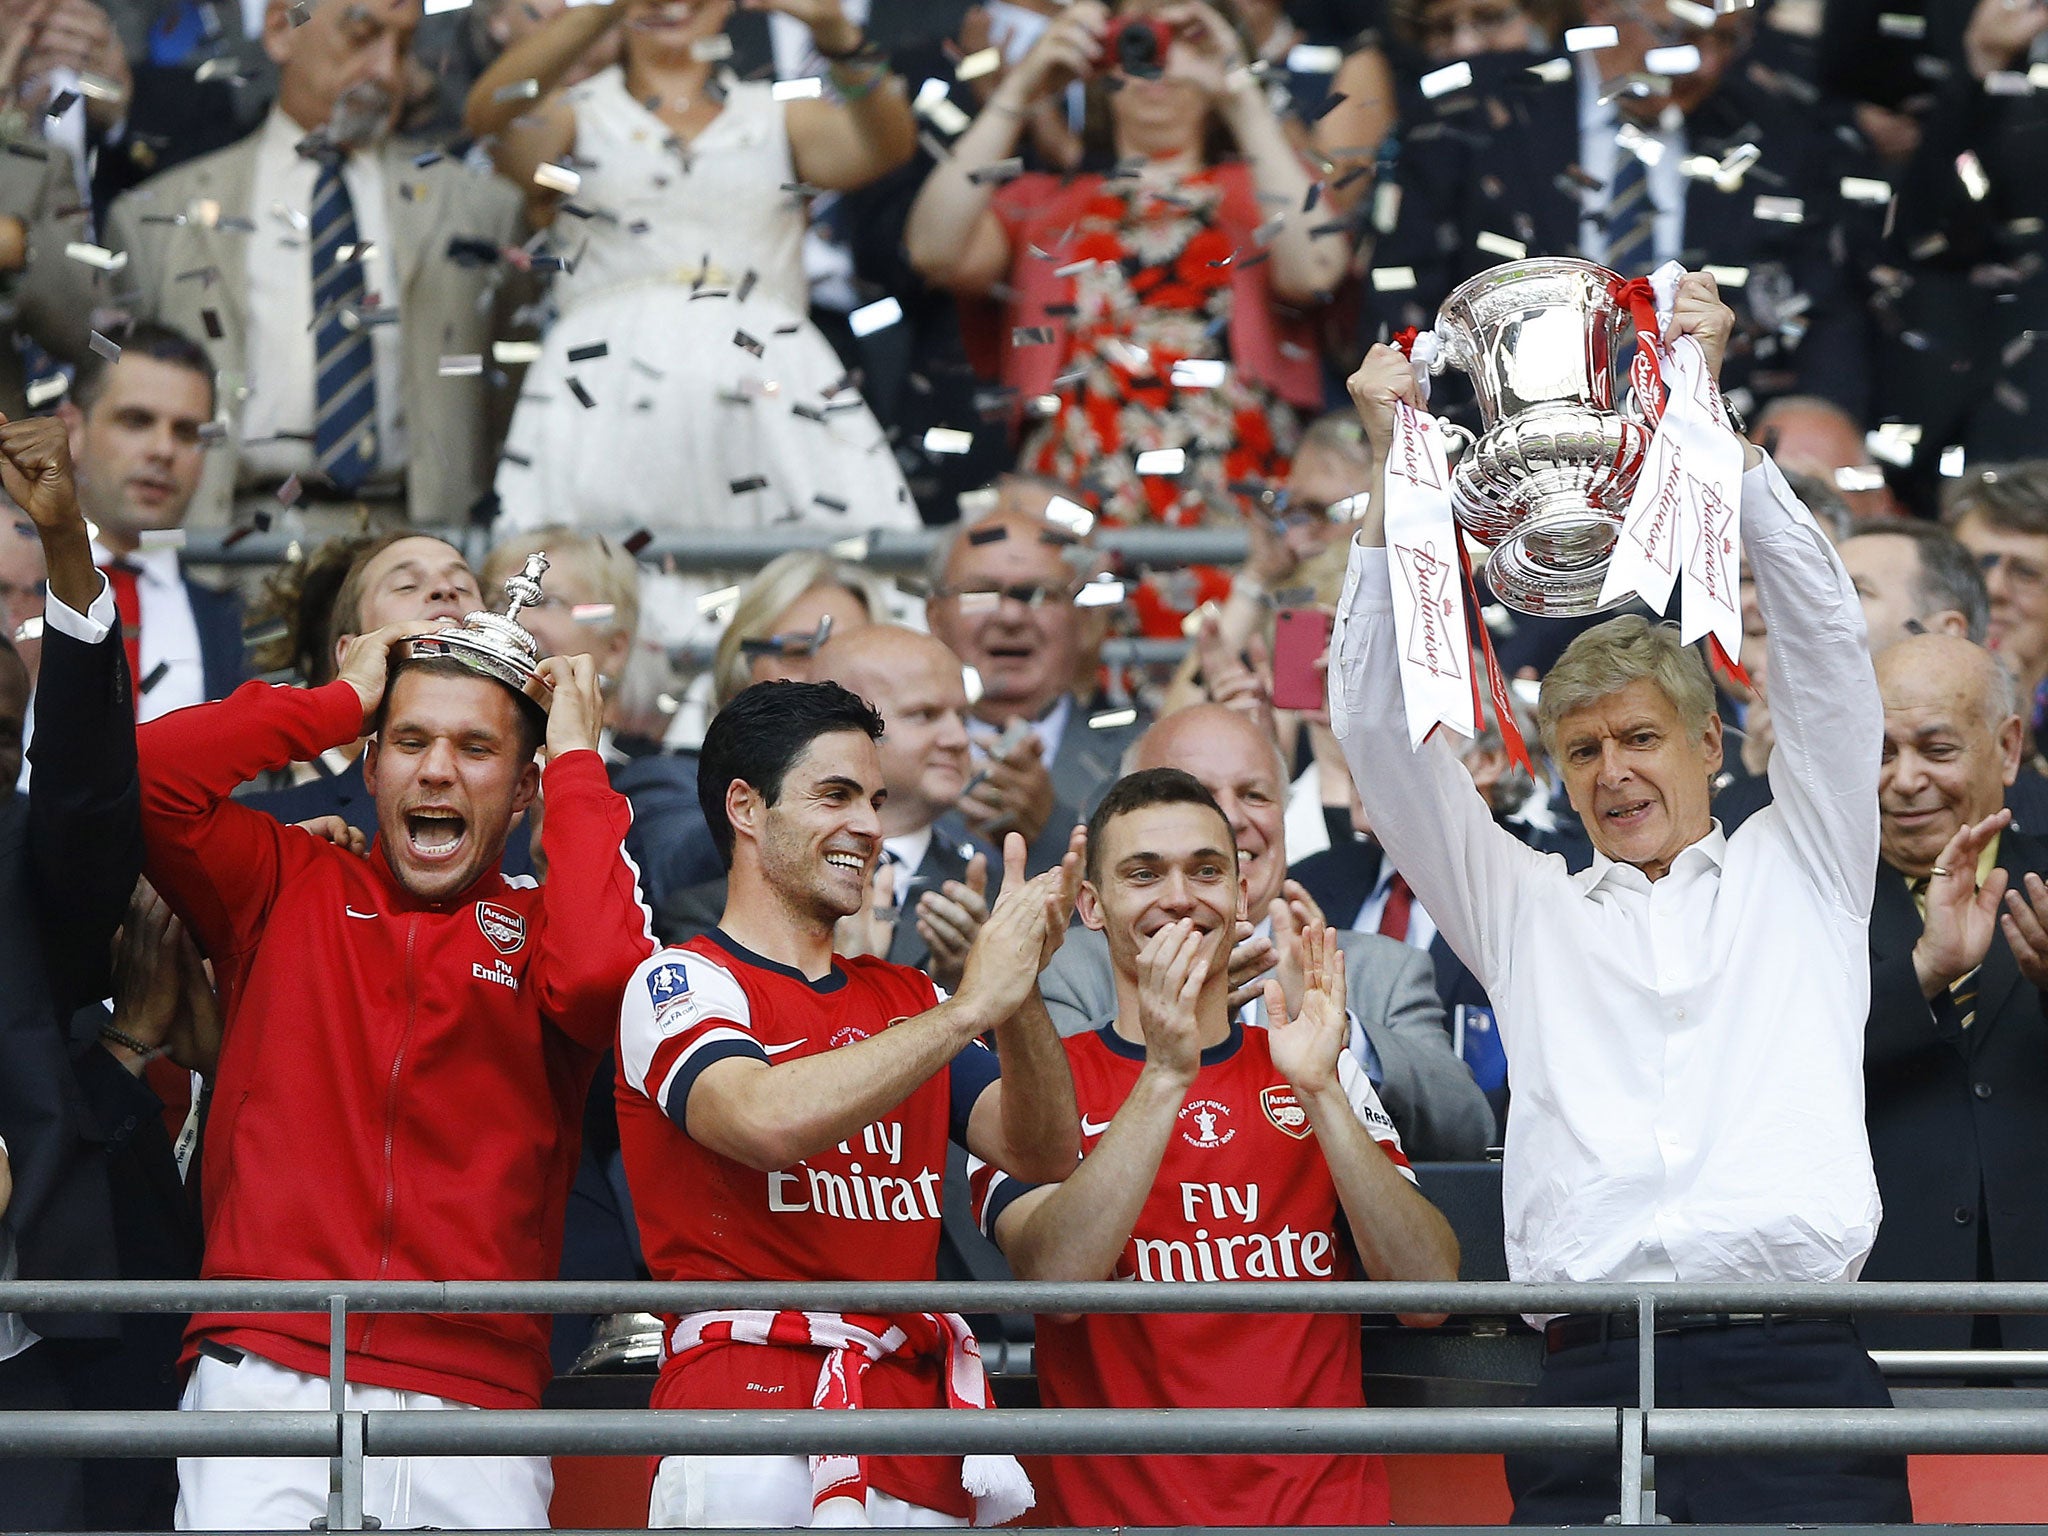 Back in the old routine: Arsène Wenger, the Arsenal manager, still remembers what to do with a trophy as he lifts the 2014 FA Cup after a thrilling 3-2 comeback victory over Hull City in the final